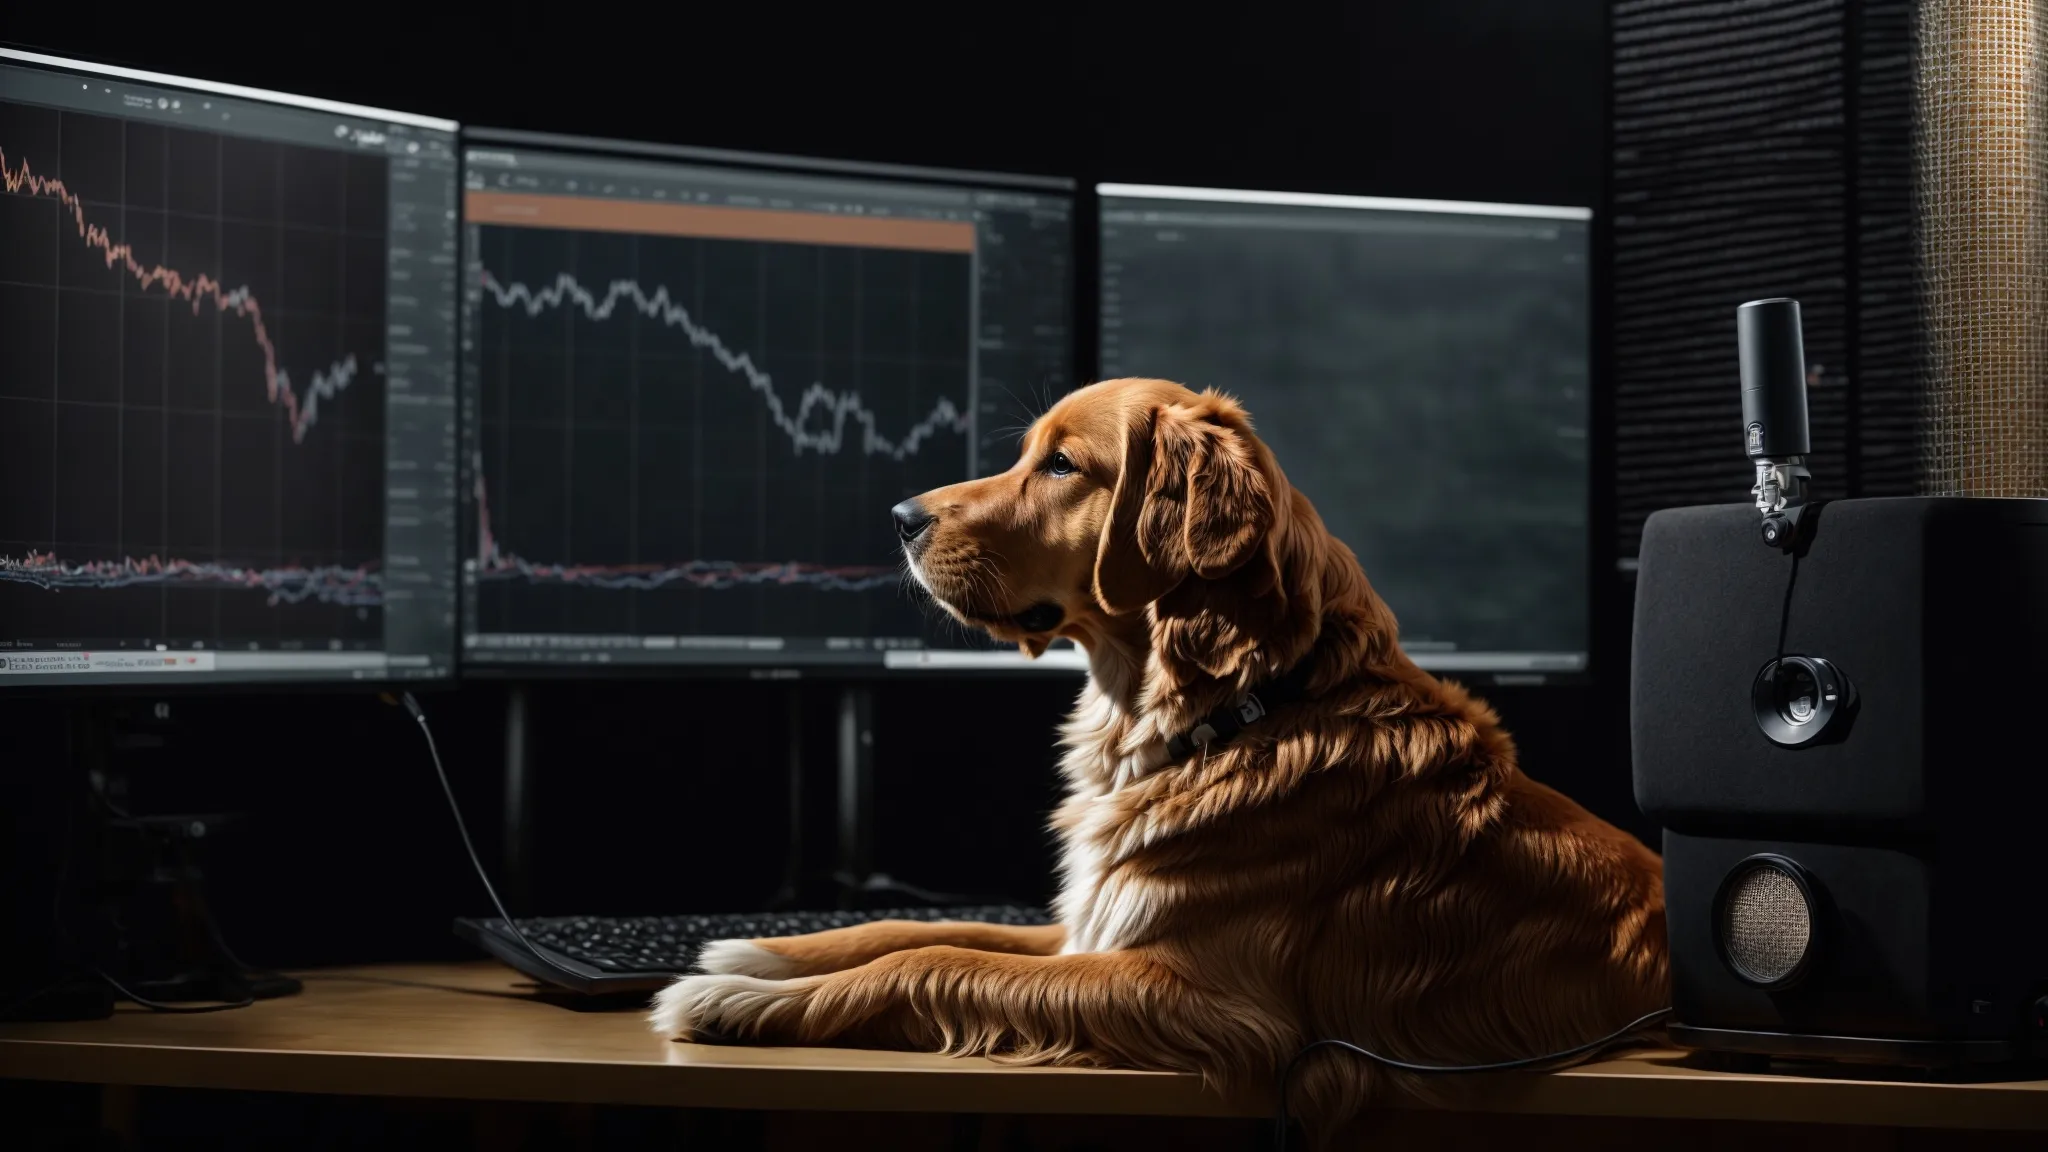 a golden retriever sits before a microphone, as a computer screen displays sound waves in the background.